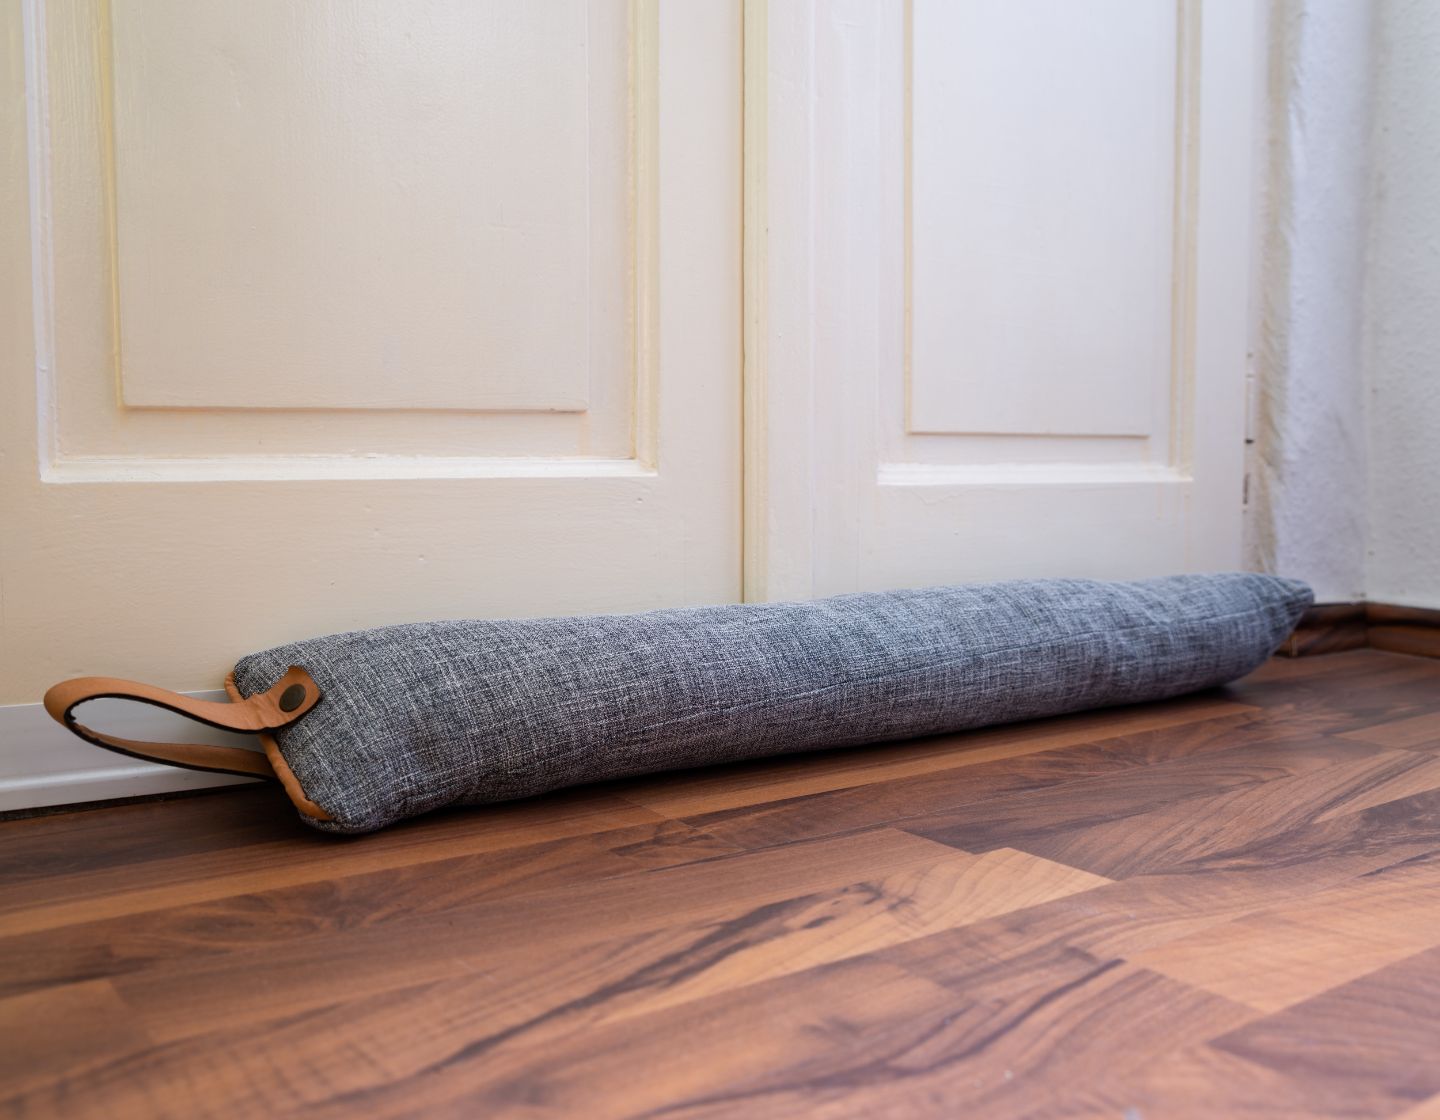 draught-excluder-2-1440-x-1120